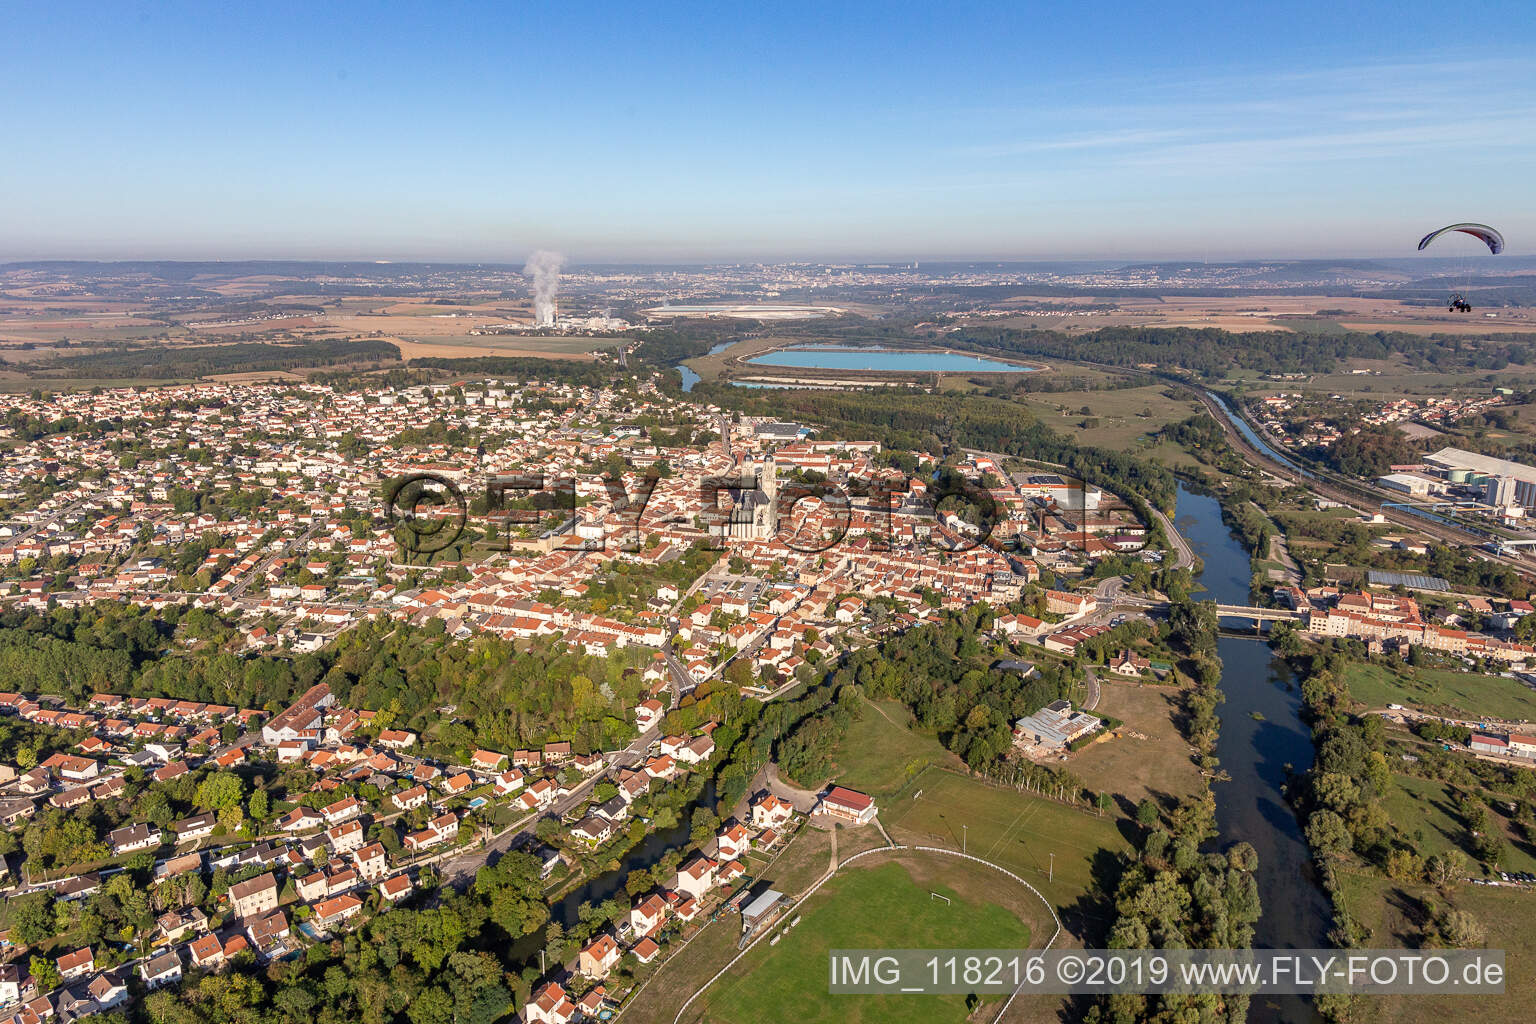 Aerial view of Saint-Nicolas-de-Port in the state Meurthe et Moselle, France